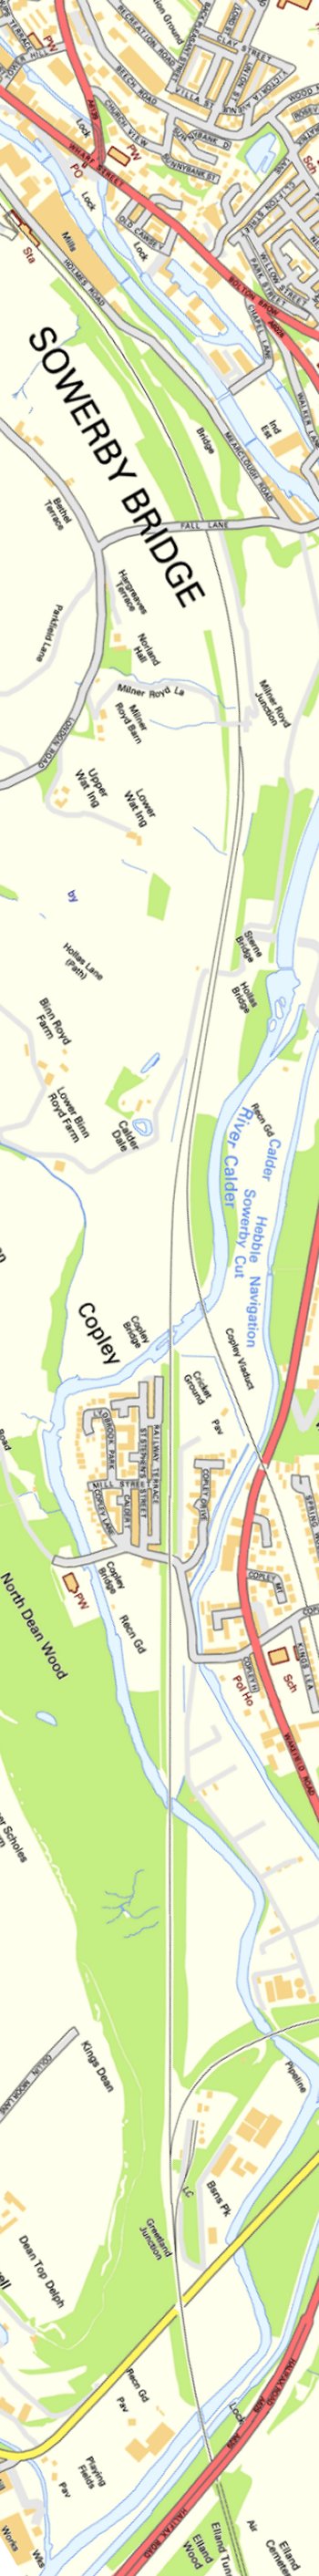 Section from Ordnance Survey OpenSource mapping 2013 showing L&YR railway line from Sowerby Bridge railway station to Greetland.